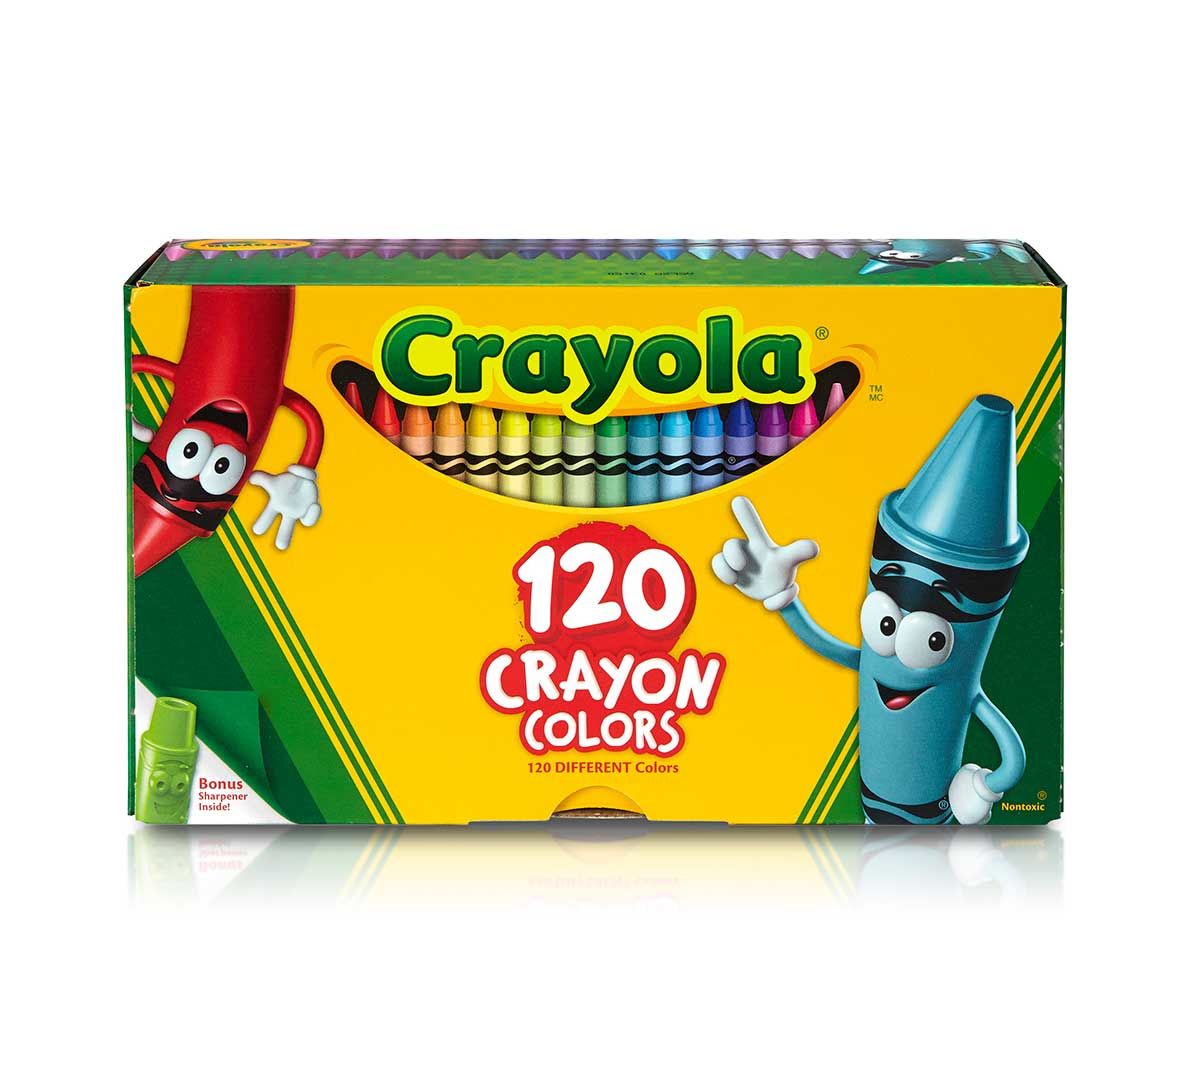 CRAYONS CONSTRUCTION PAPER 16 PACK – Scribbles Crafts – Brooklyn's Premier  Crafting Resource